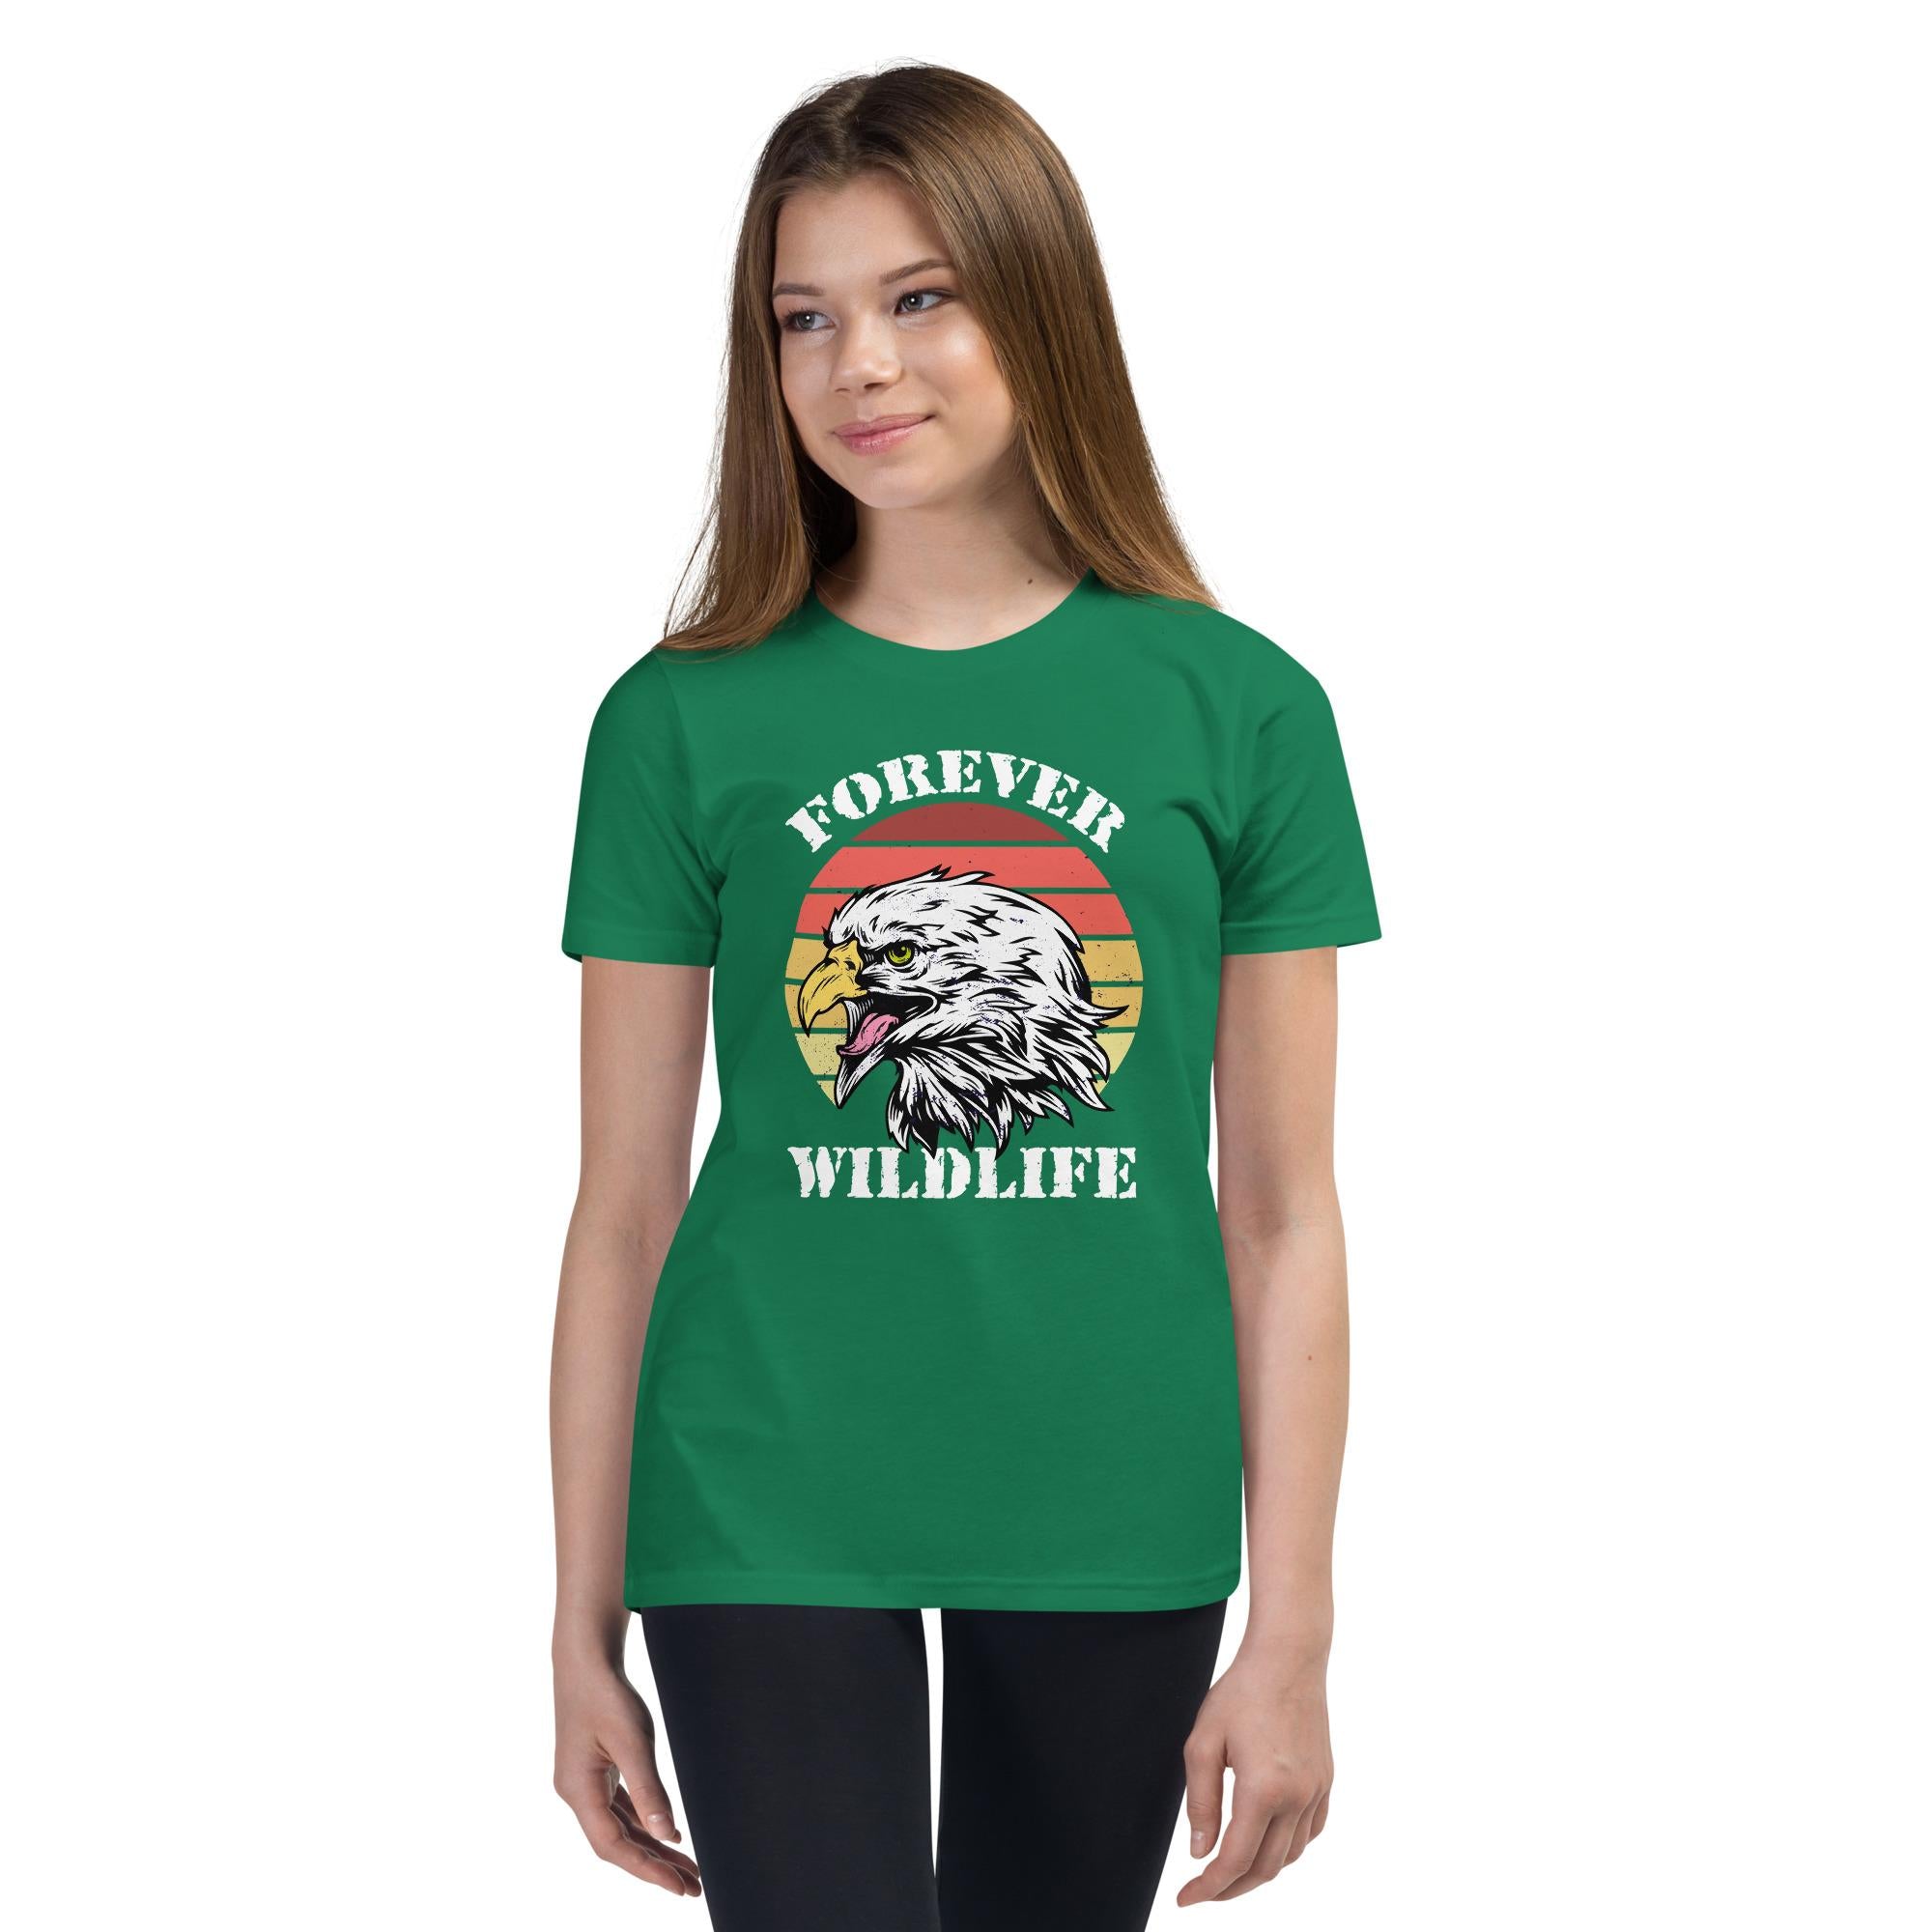 Teen wearing Kelly Green Youth T-Shirt with Eagle graphic as part of Wildlife T Shirts, Wildlife Clothing & Apparel by Forever Wildlife